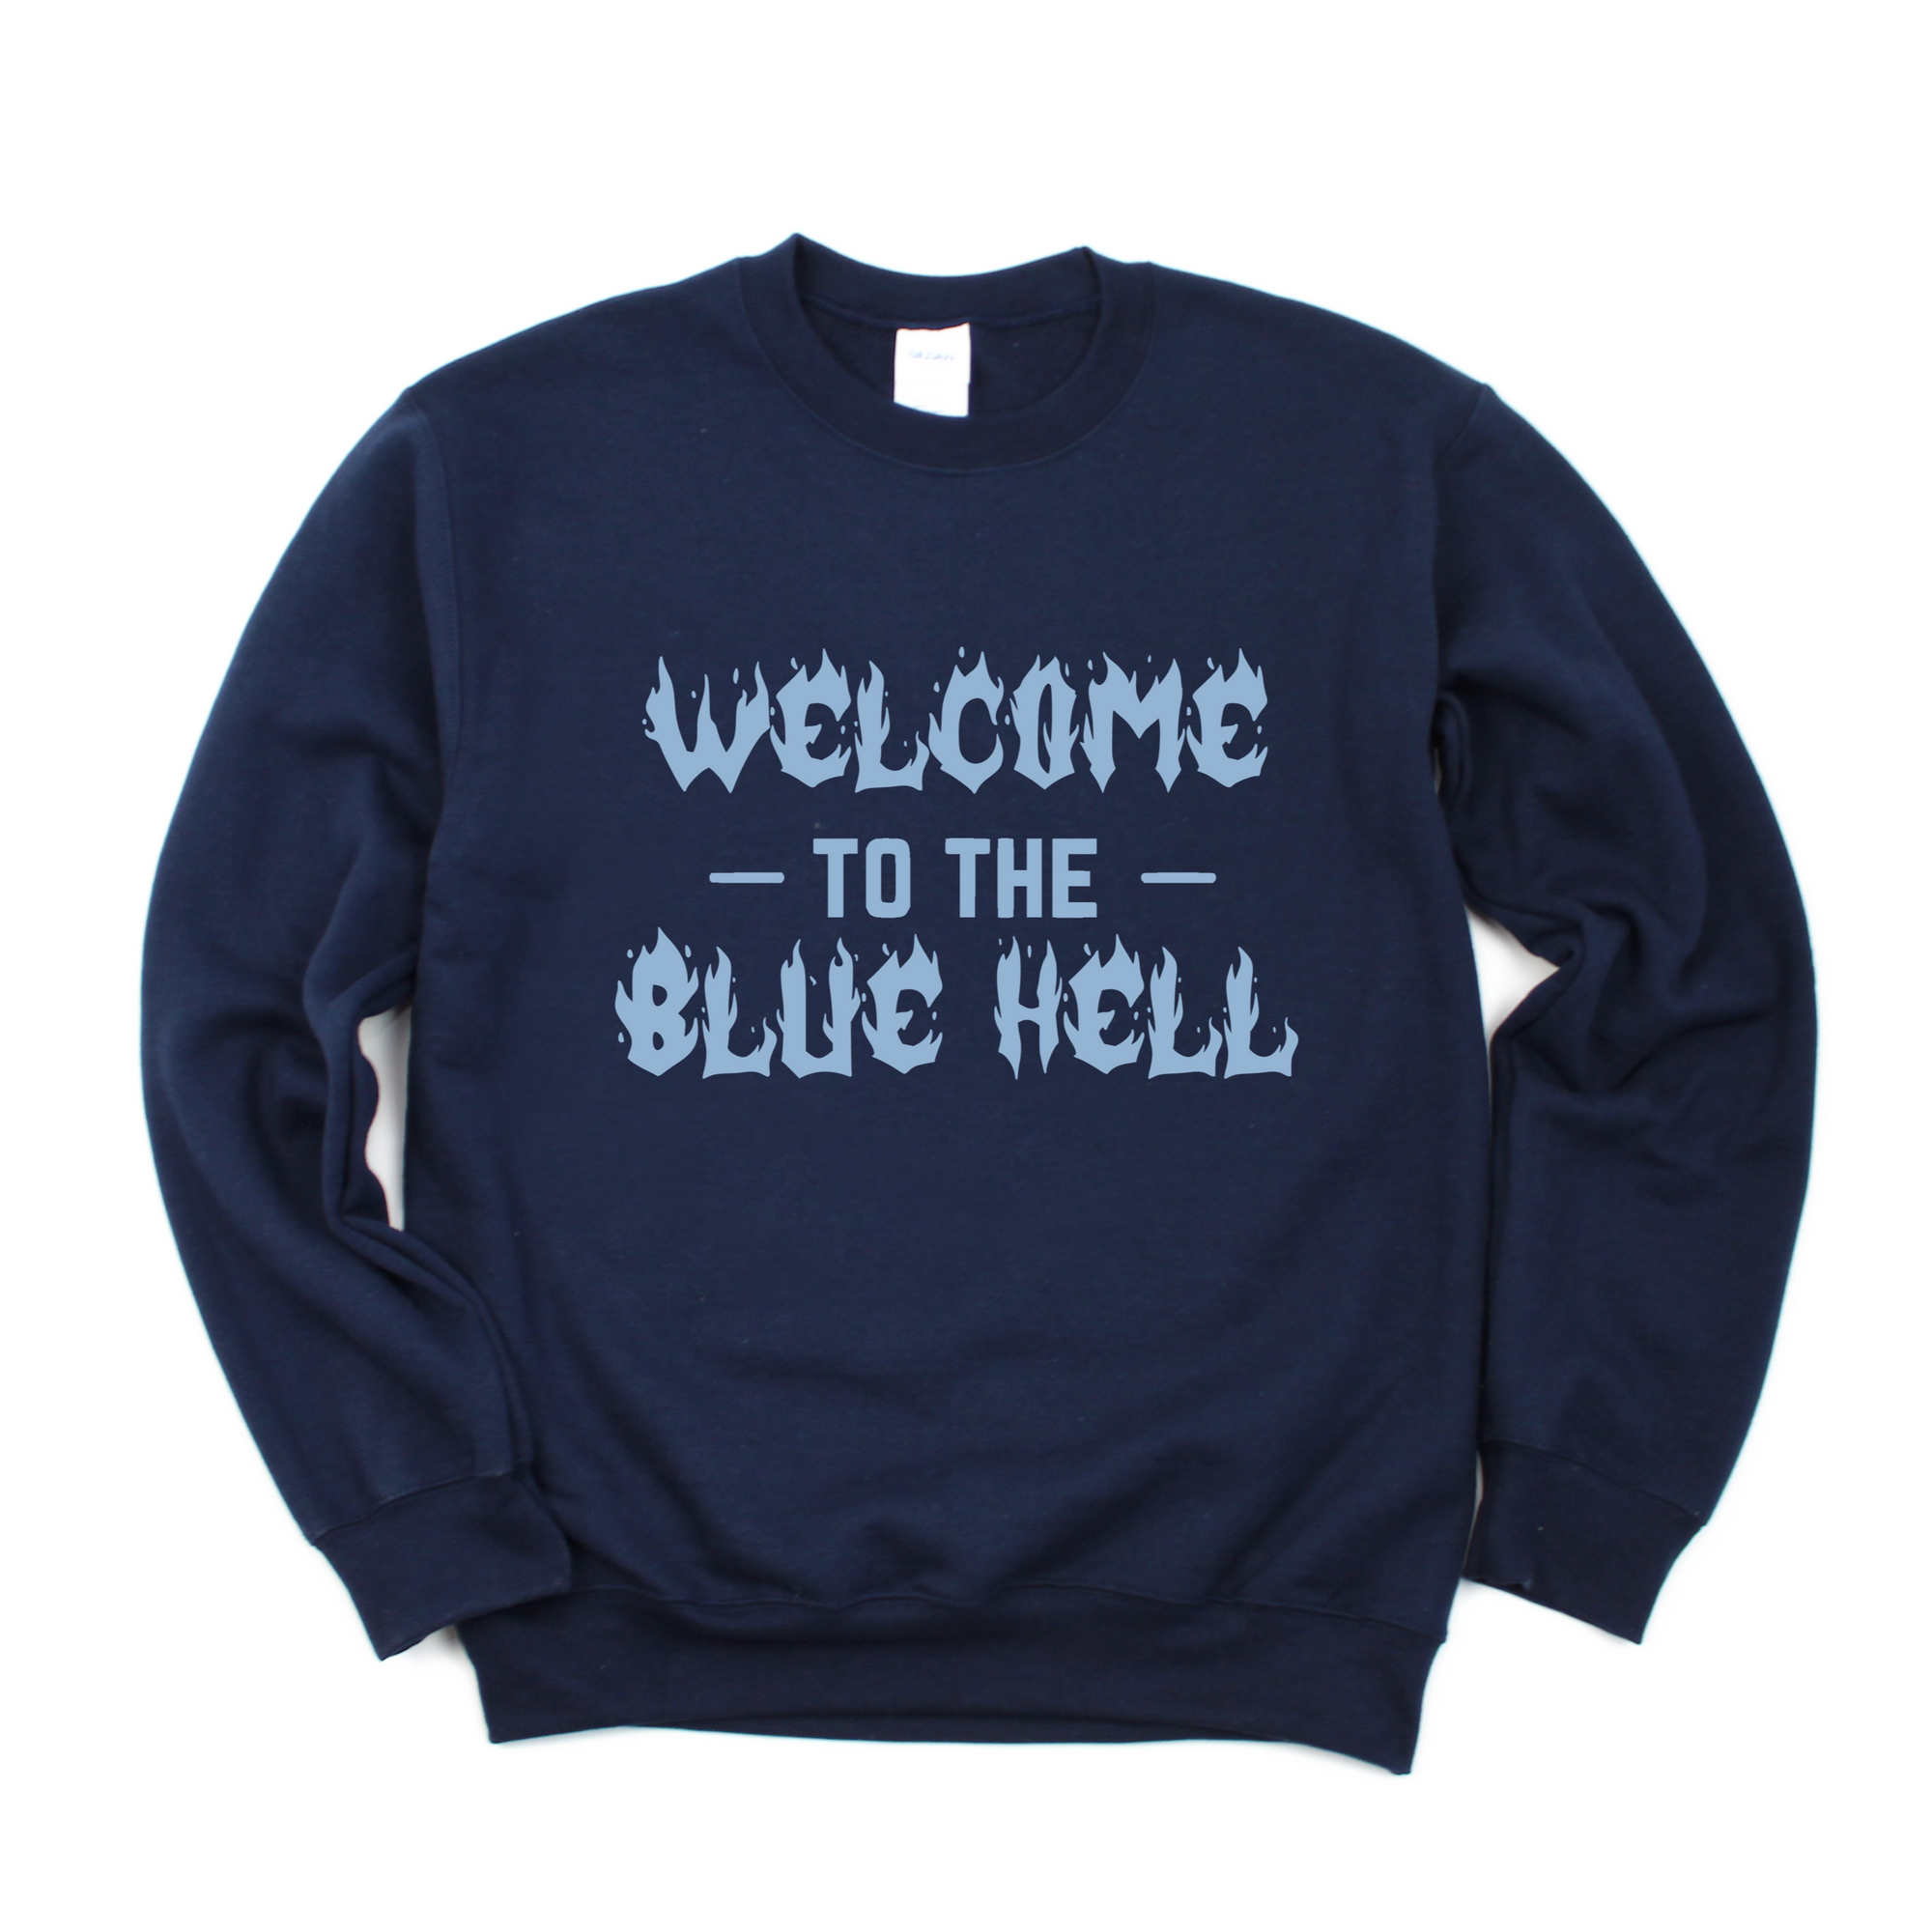 Welcome to the Blue Hell Tee OR Sweatshirt